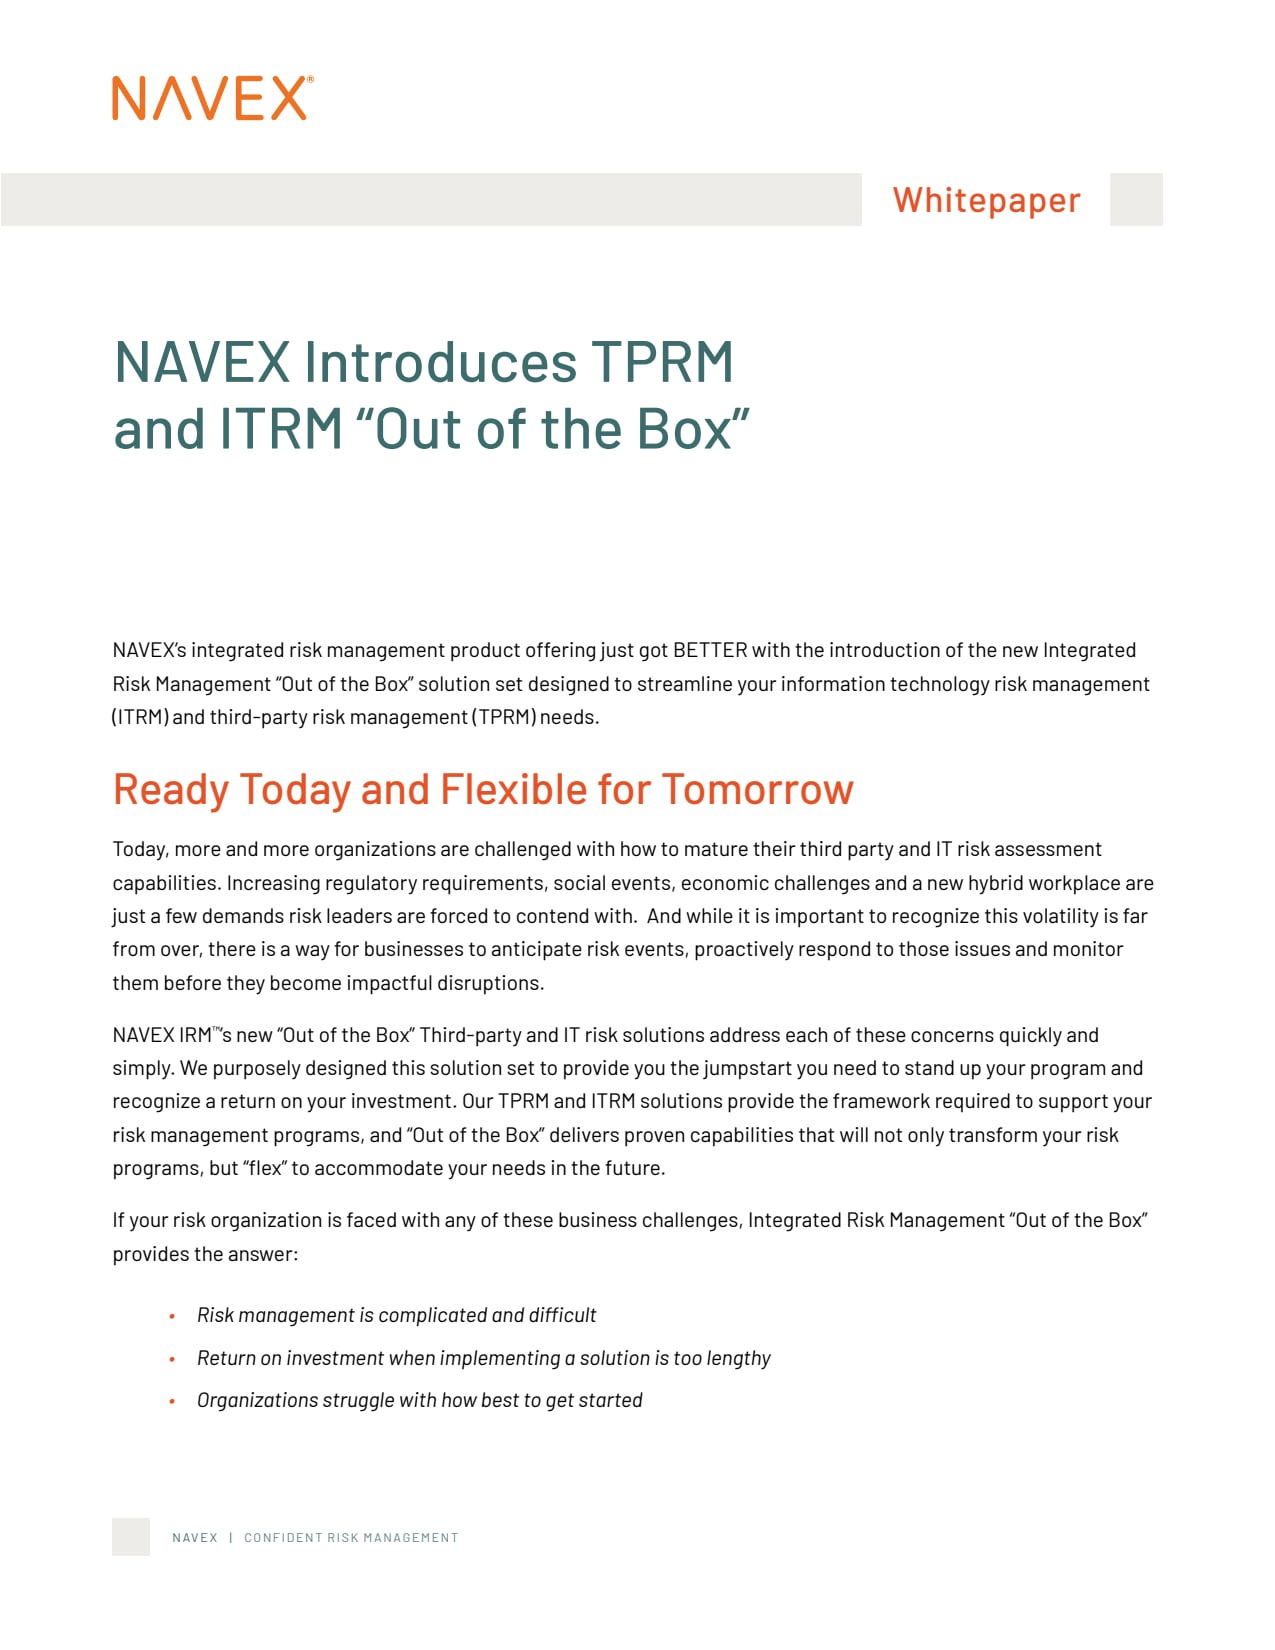 NAVEX Introduces TPRM and ITRM "Out of the Box"